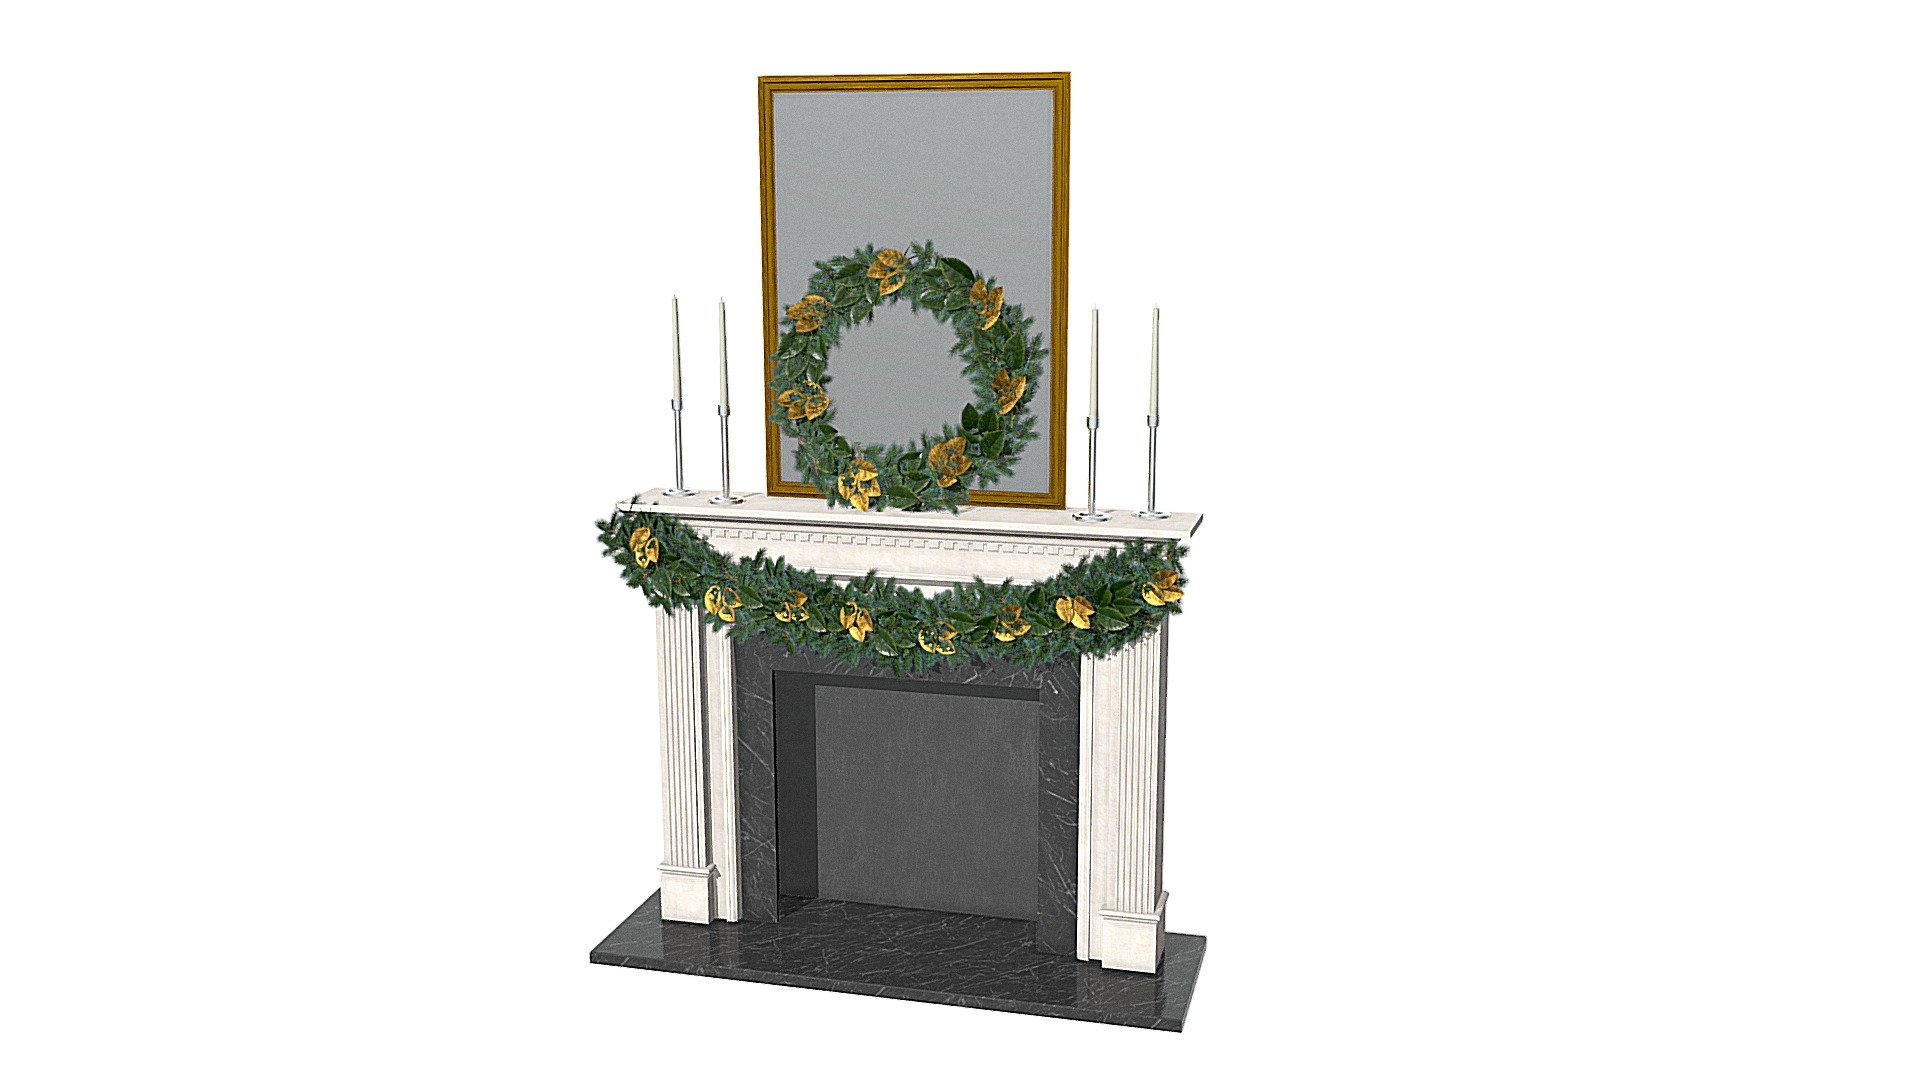 Christmas Fireplace Mantel Lowpoly Realistic Model

Lowpoly Christmas Wreath 3D Model

Fresh Evergreens with Gold Painted Magnolia Leaves




HD Textures

PBR Materials 

Low Poly model

Limestone fireplace mantel 3d Model

Timeless design carved from limestone
Simple geometric lines and classical proportions




HD Textures

PBR

Lowpoly
 - Christmas Fireplace Mantel - Buy Royalty Free 3D model by Omni Studio 3D (@omny3d) 3d model